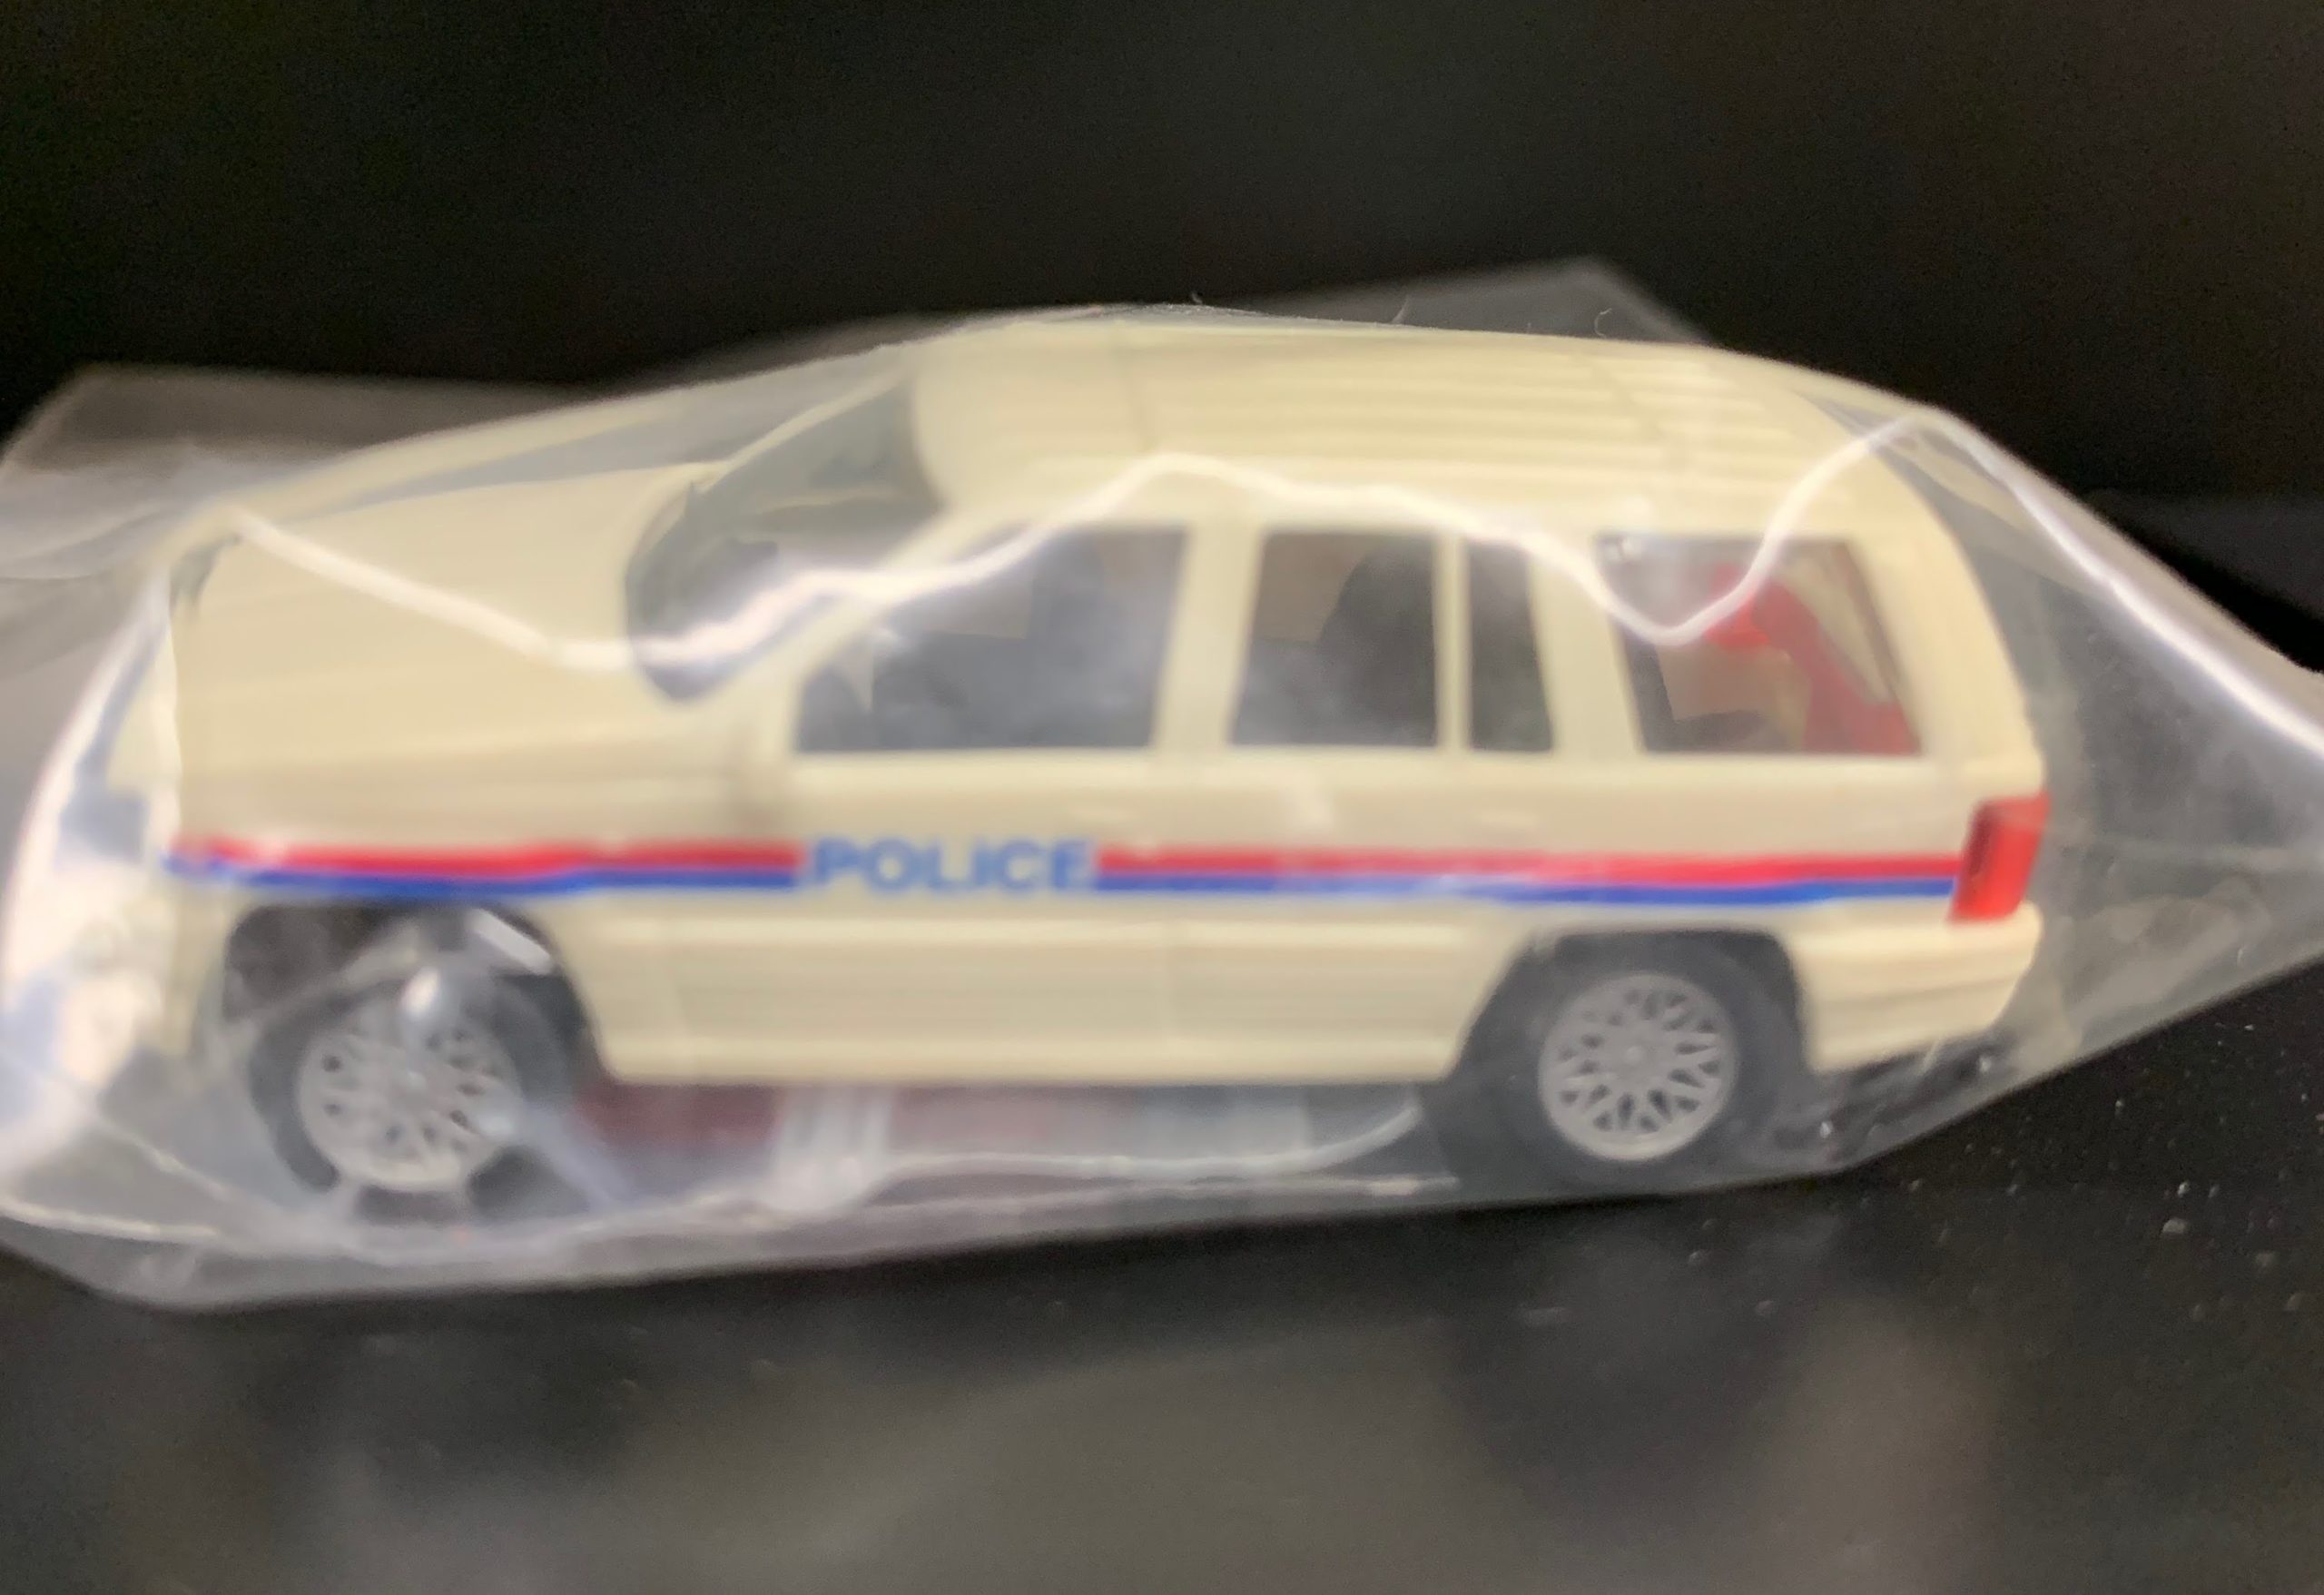 Police SUV by Promotex